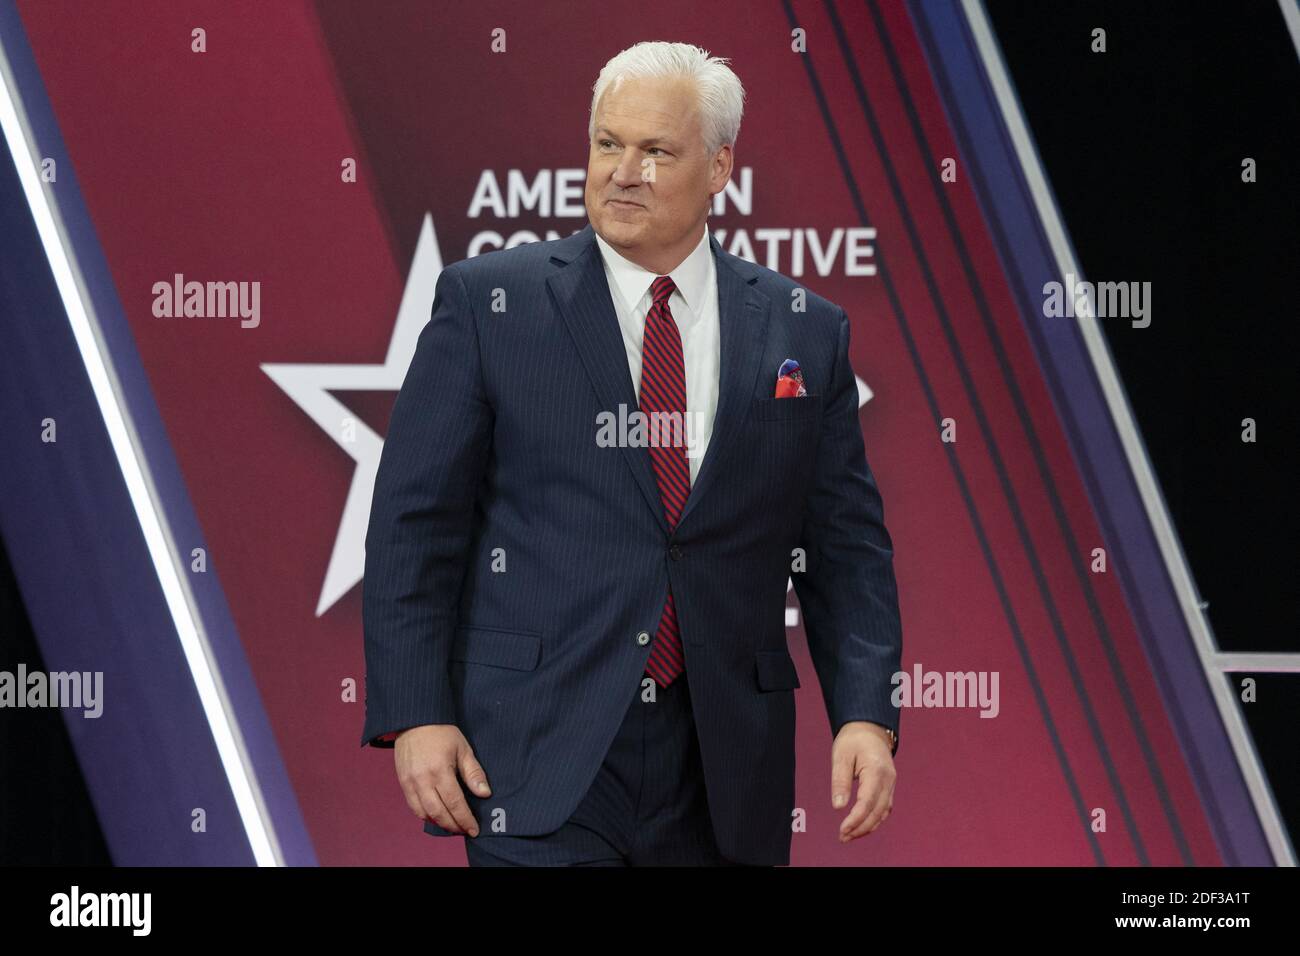 February 29, 2020 - Oxon Hill, MD, United States: Matt Schlapp, chairman of the American Conservative Union arrives to address the 2020 Conservative Political Action Conference. Photo by Chris Kleponis/Pool/ABACAPRESS.COM Stock Photo